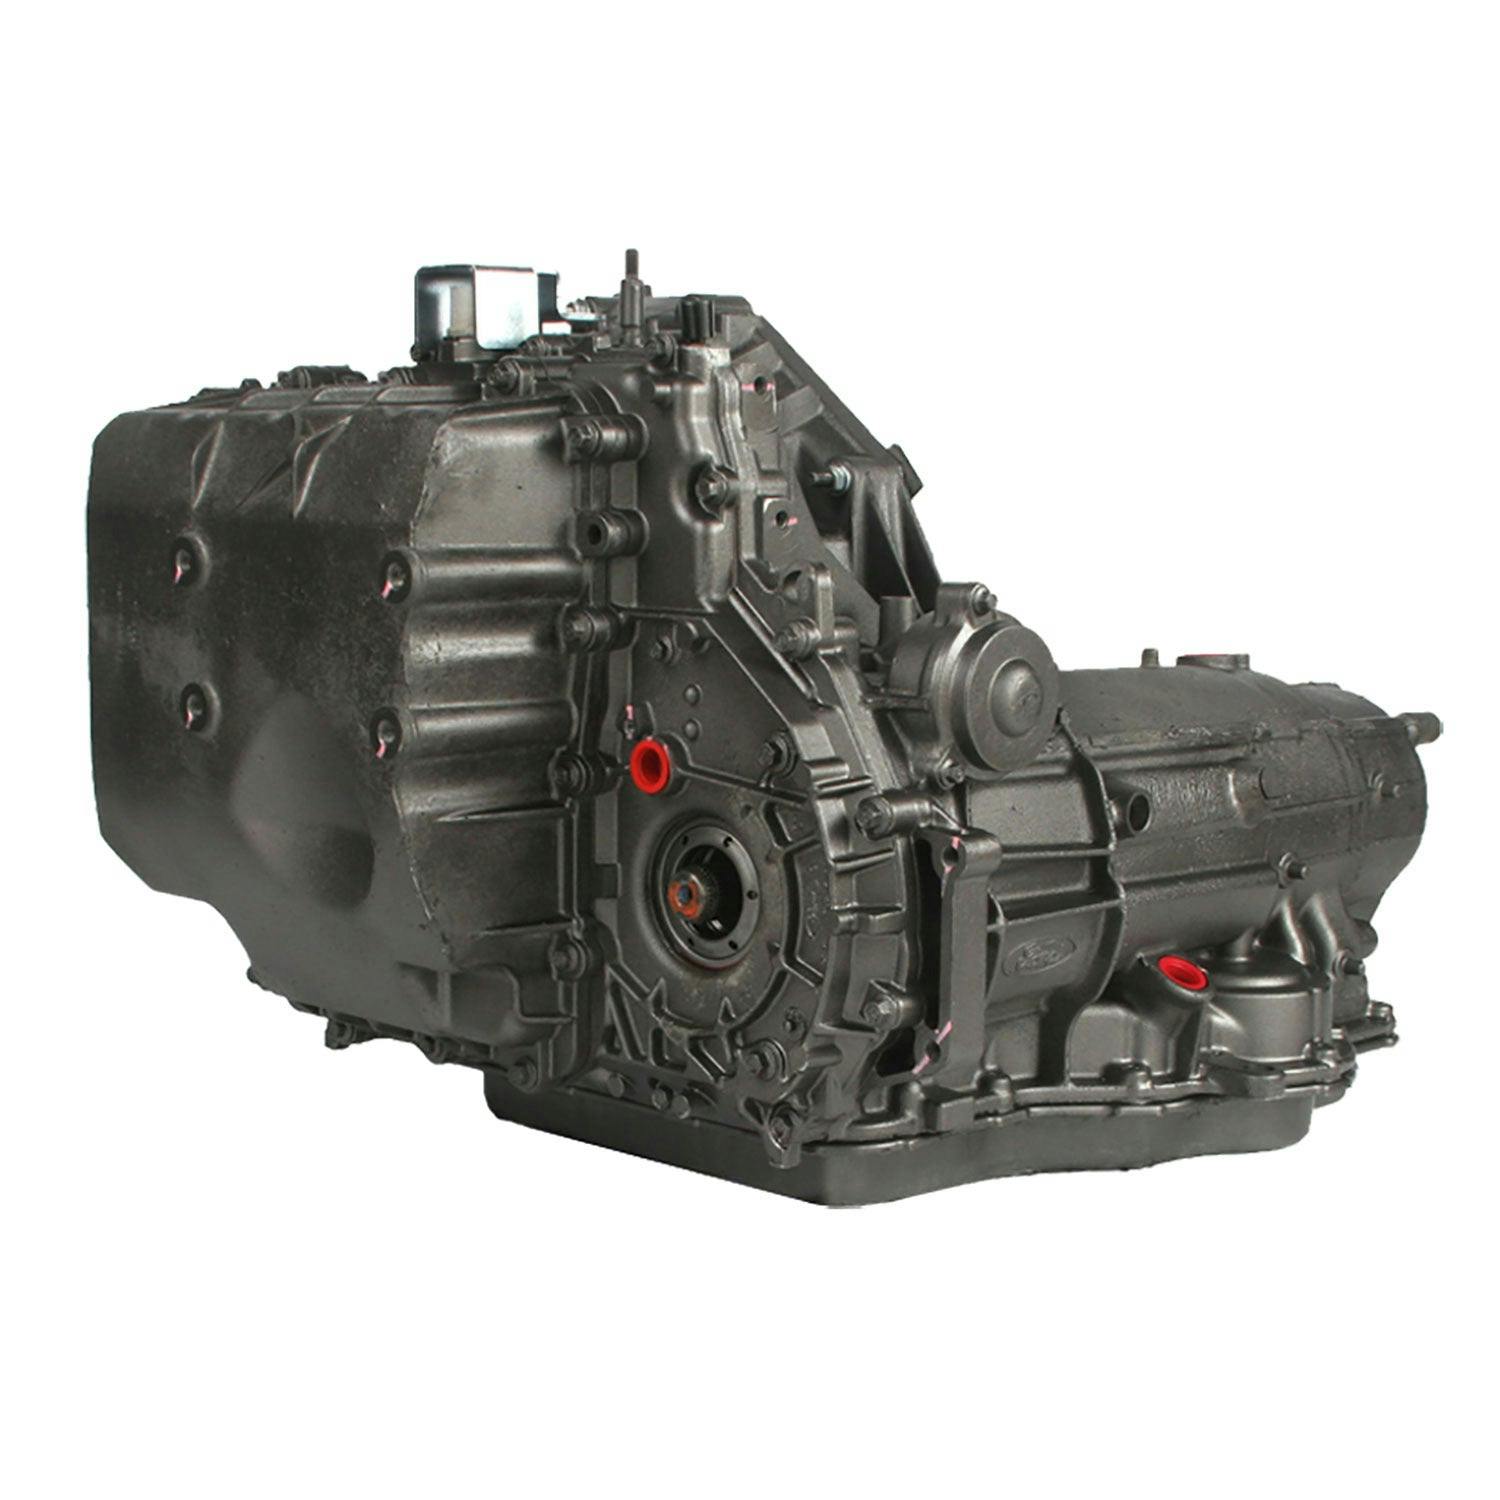 Automatic Transmission for 1999 Ford Taurus/Mercury Sable FWD with 3L V6 Engine